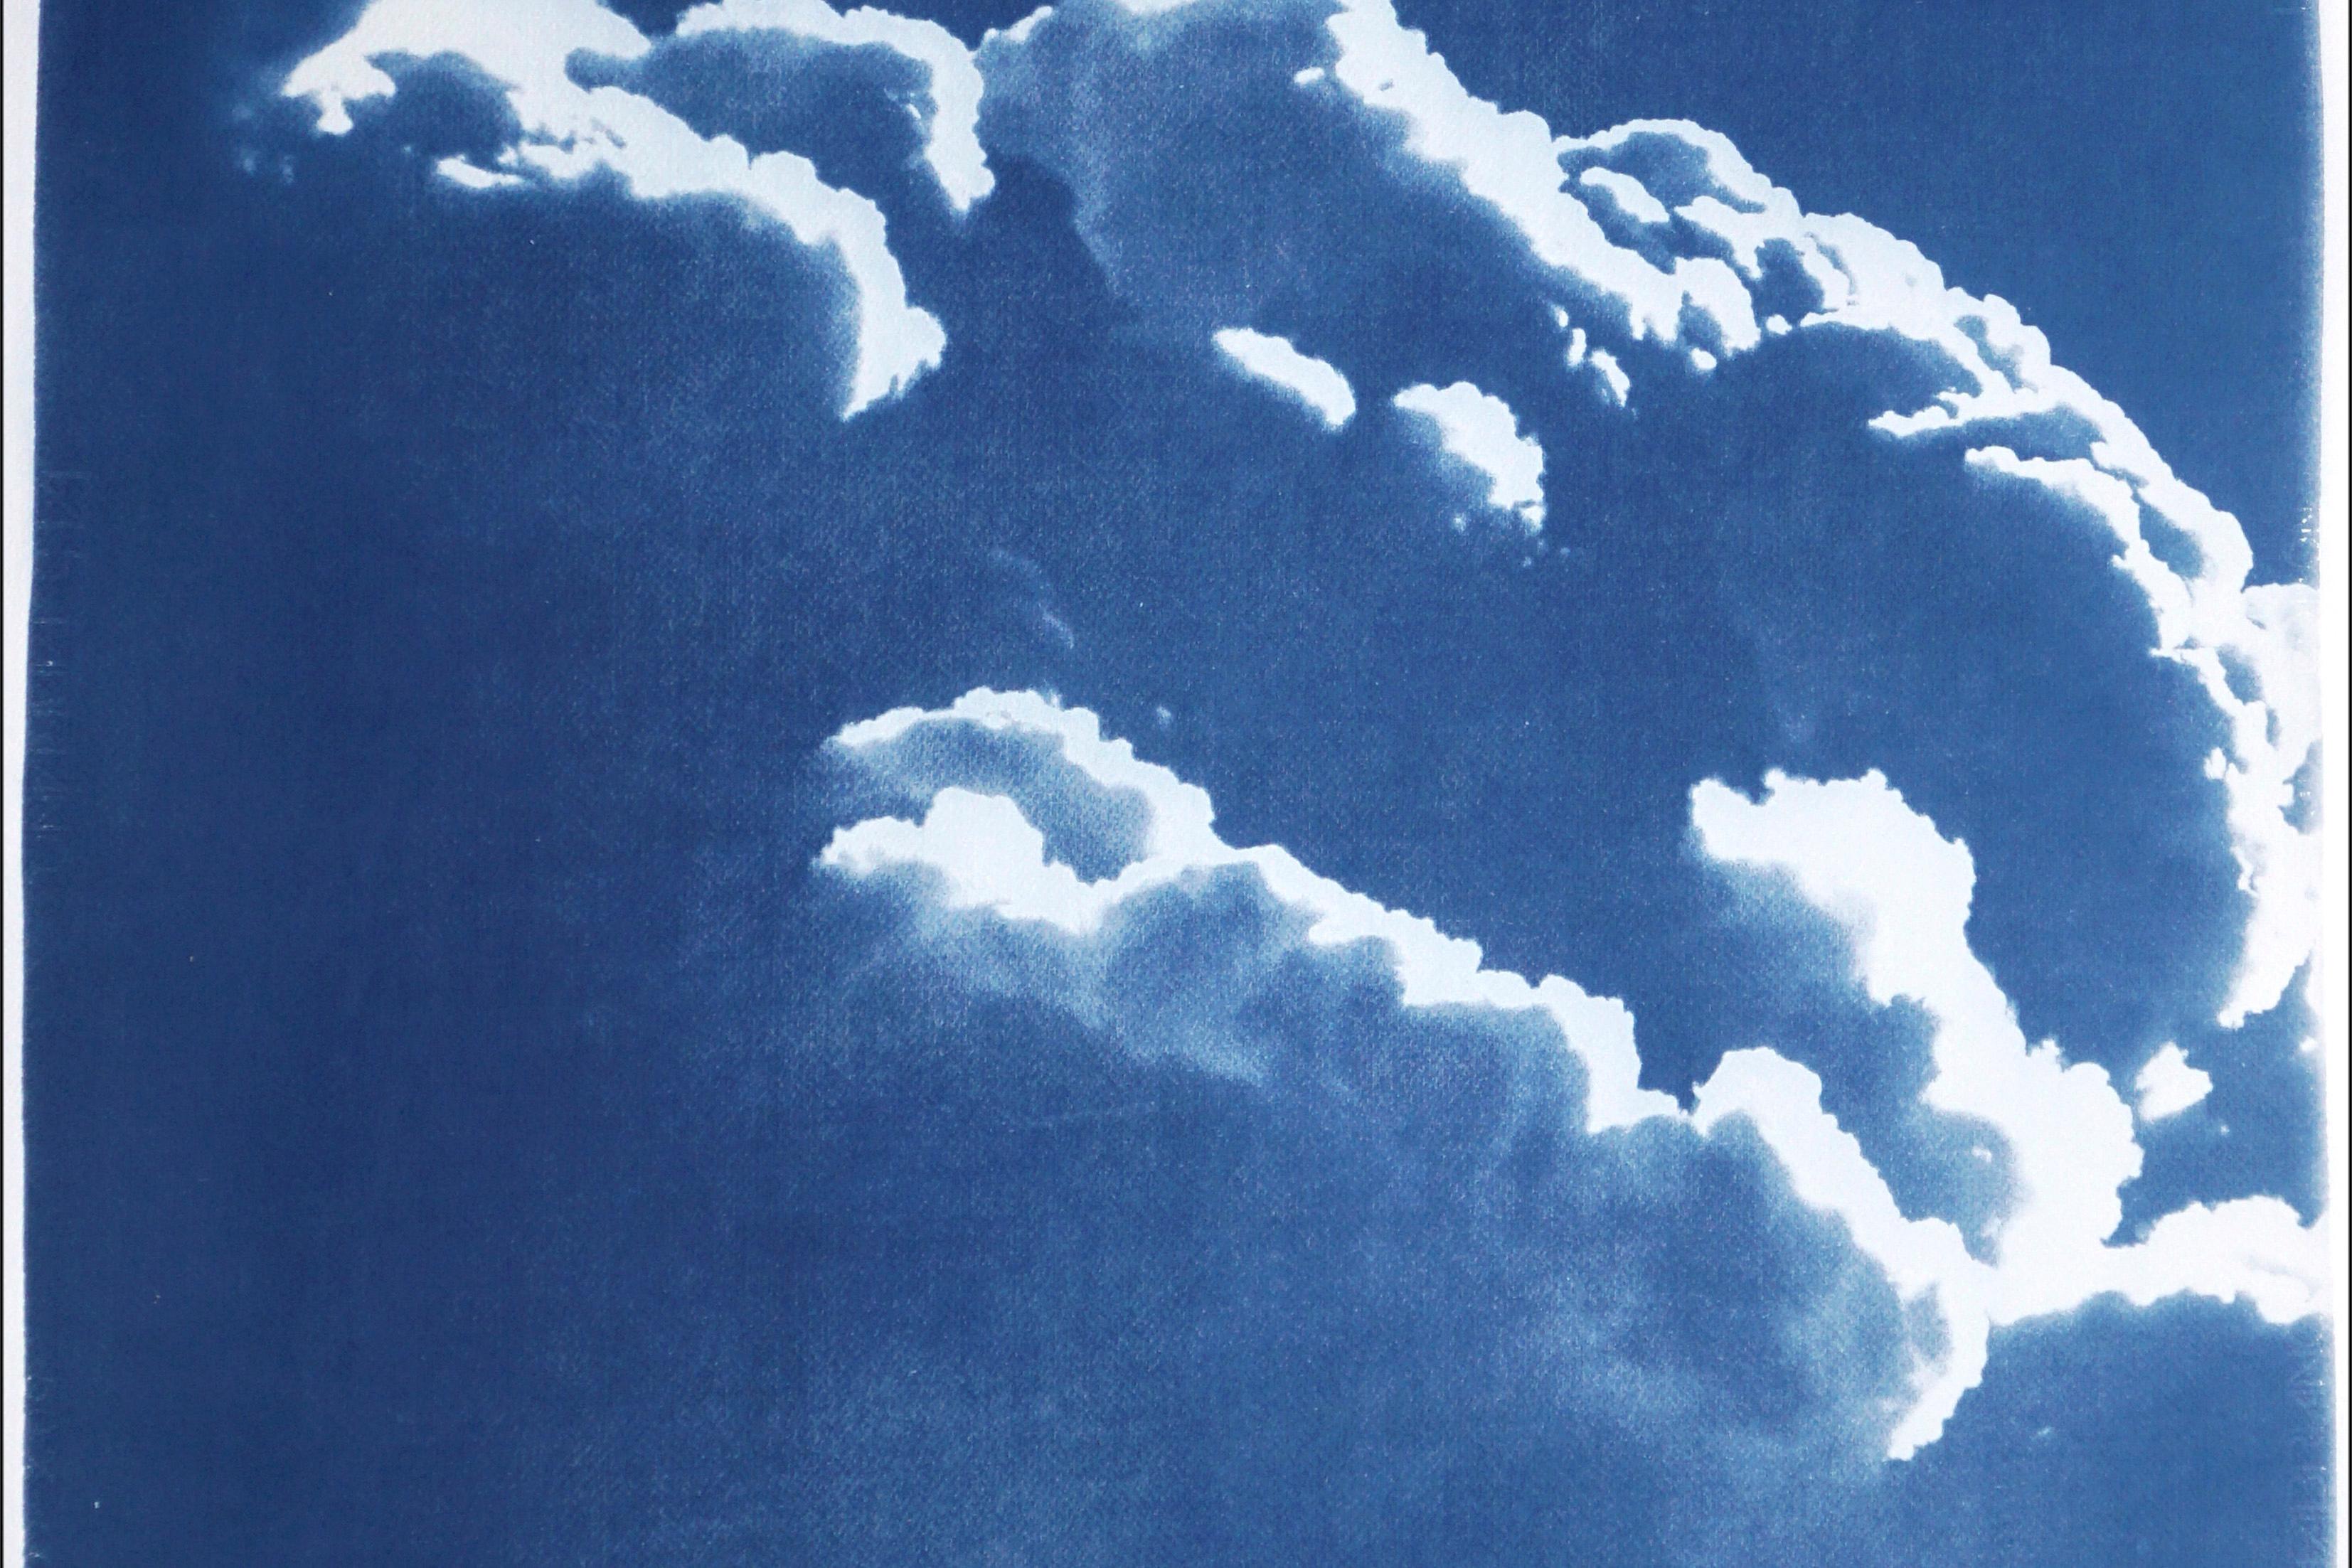 Diptych of Floating Clouds, Blue Tones Sky Scene Cyanotype Print of Silky Shapes For Sale 4